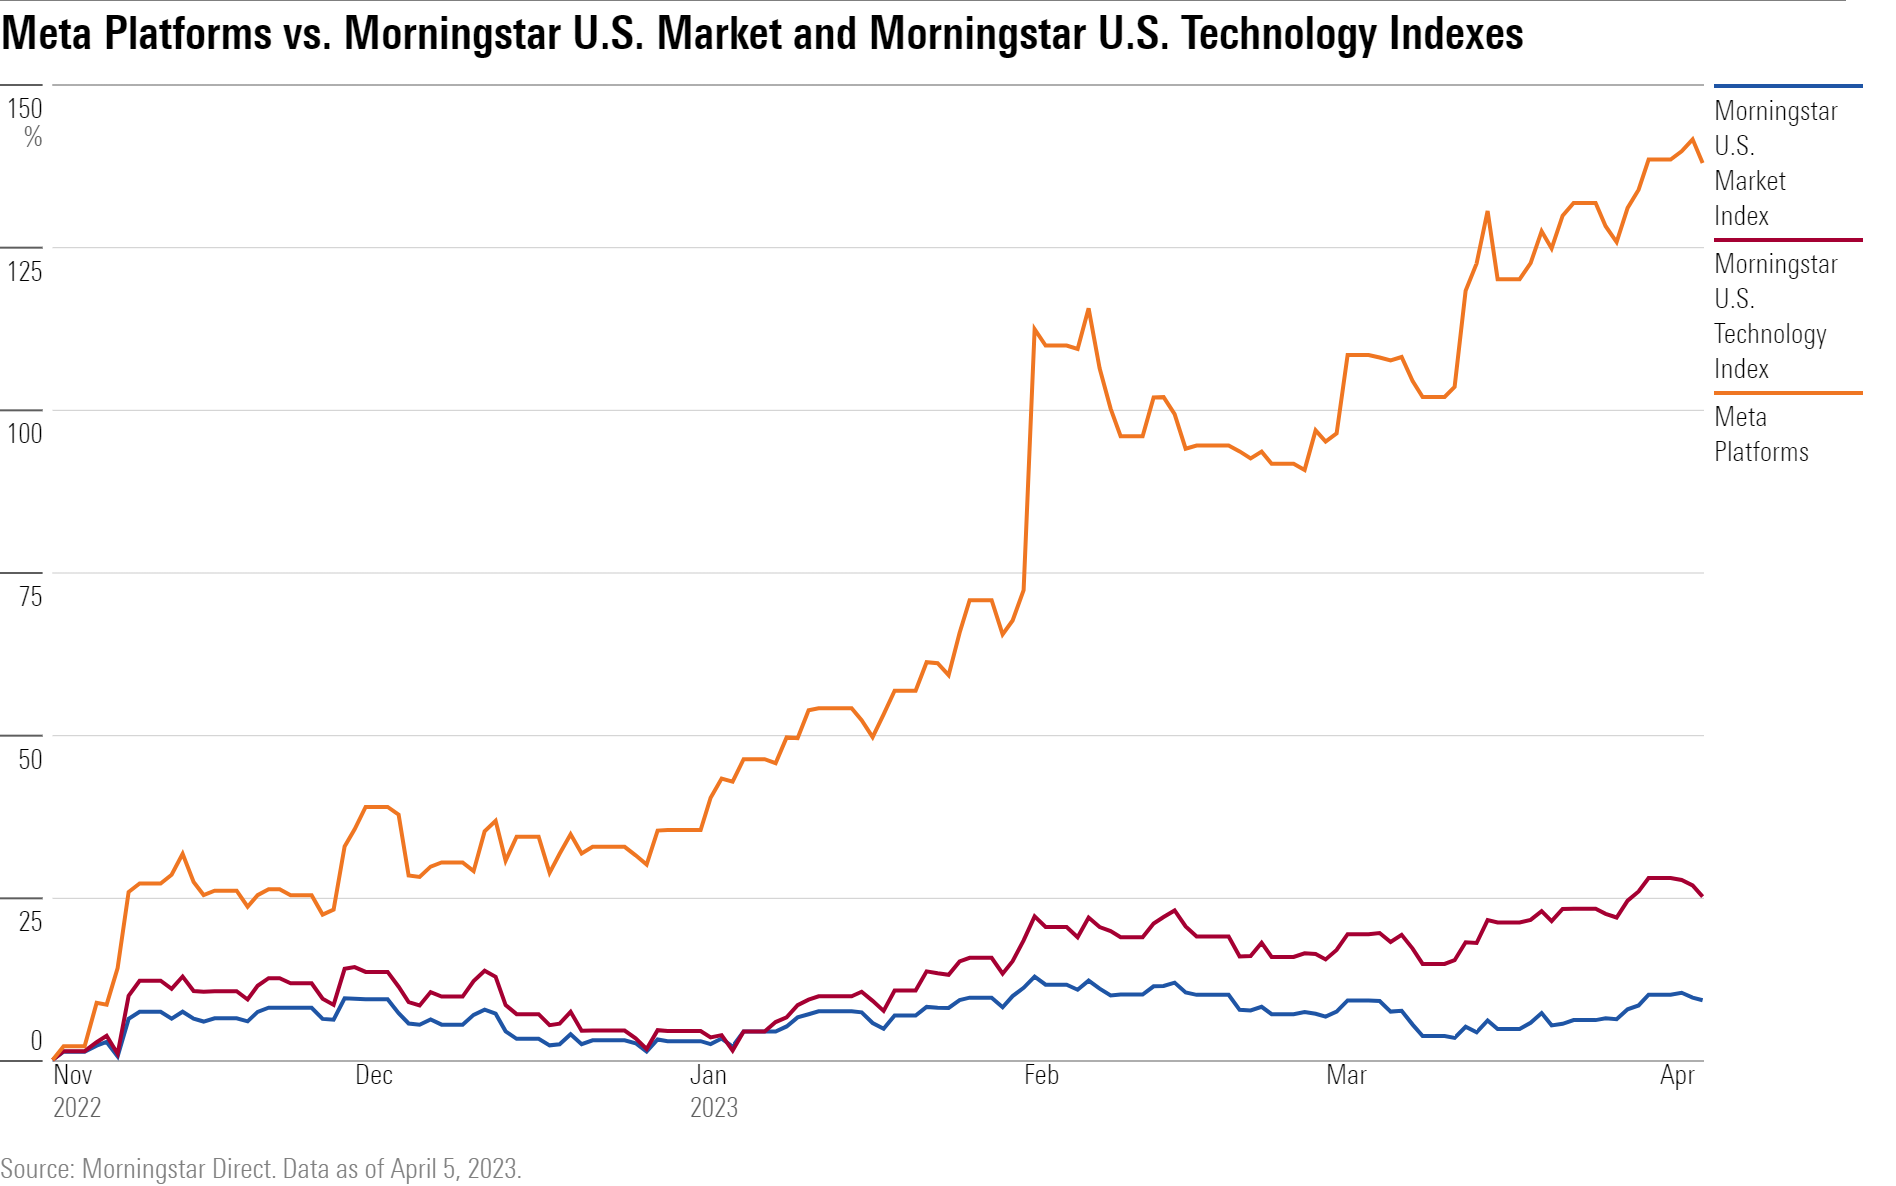 A line chart showing the performance of Meta Platforms stock compared with that of the Morningstar U.S. Market Index and Morningstar U.S. Technology Index.